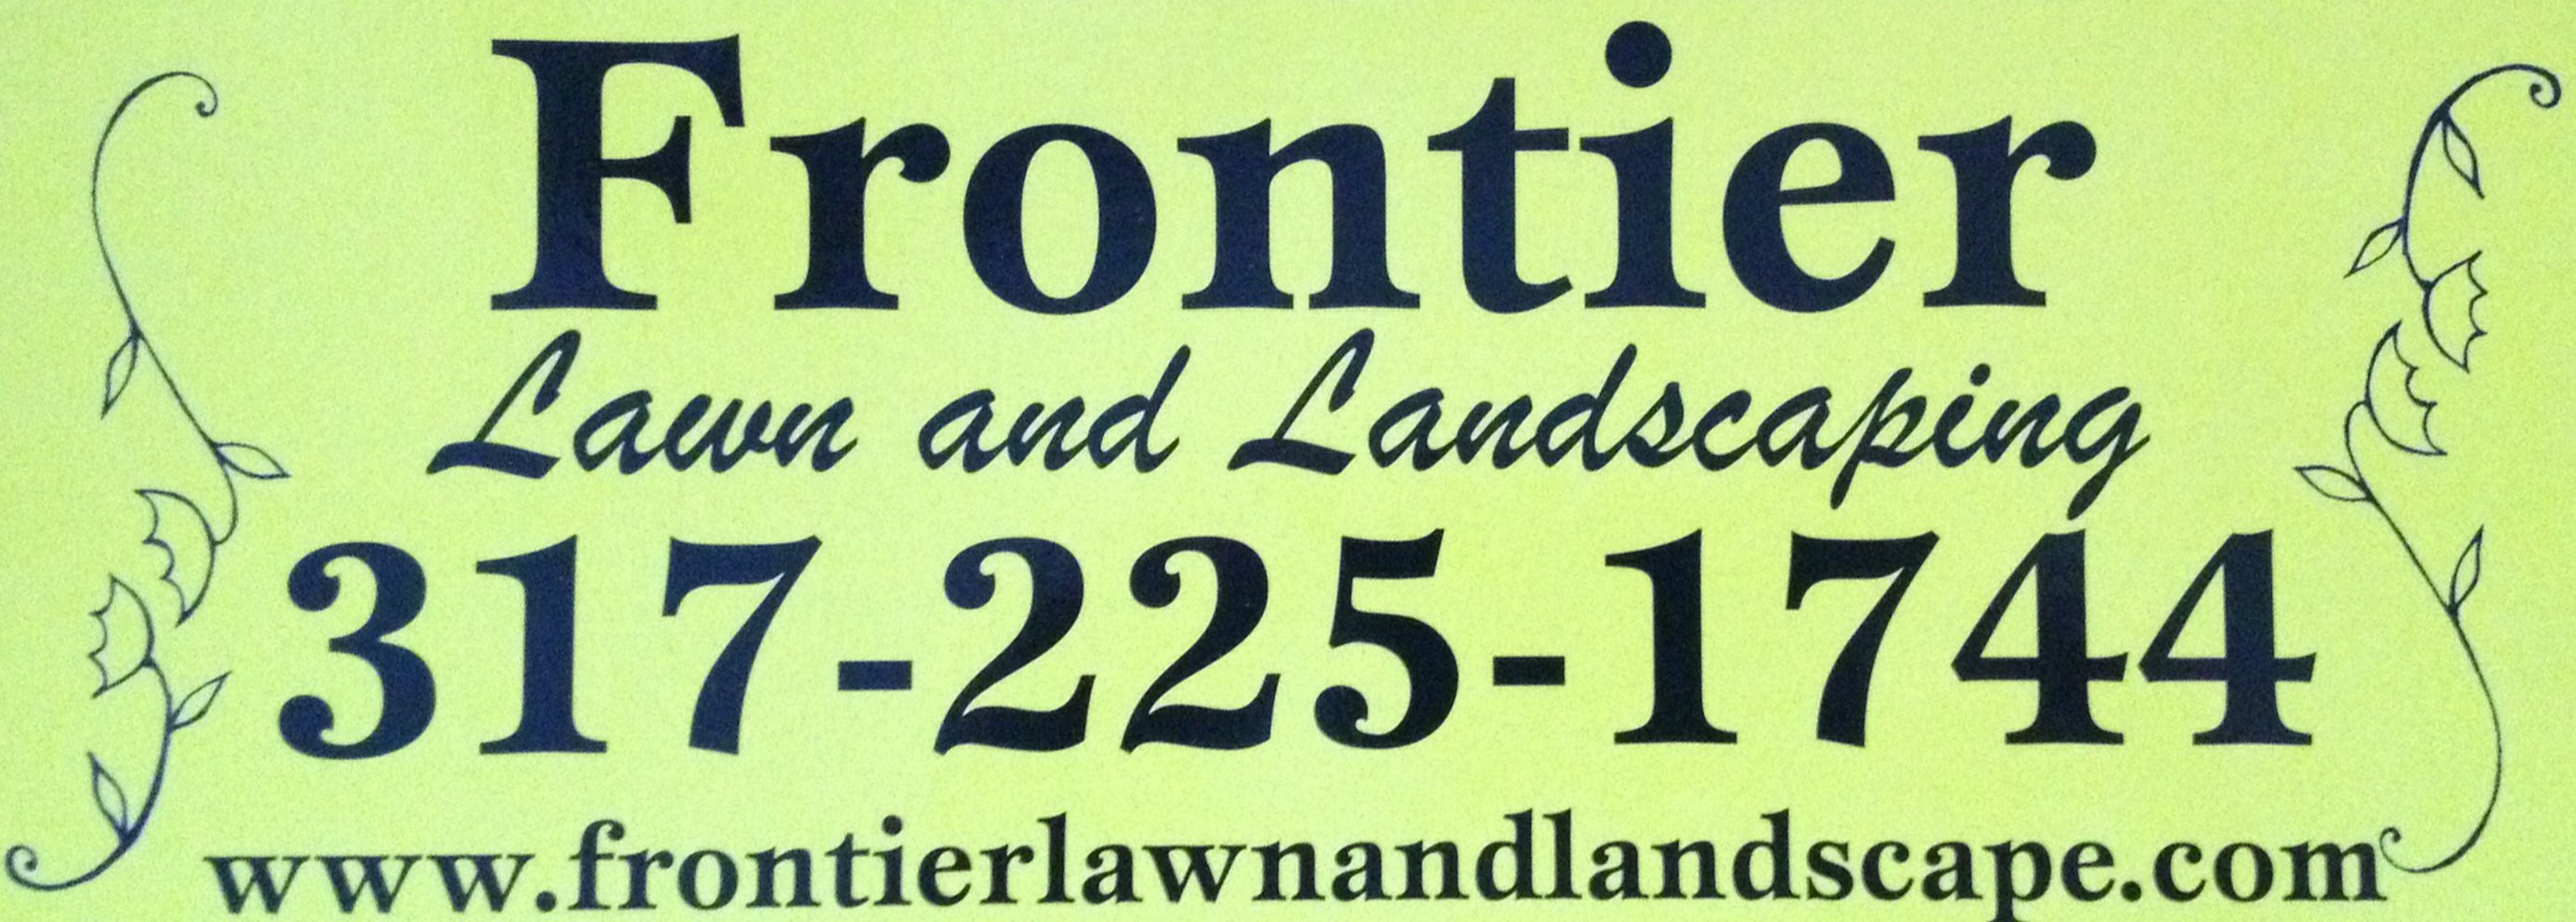 Frontier Lawn and Landscaping Logo